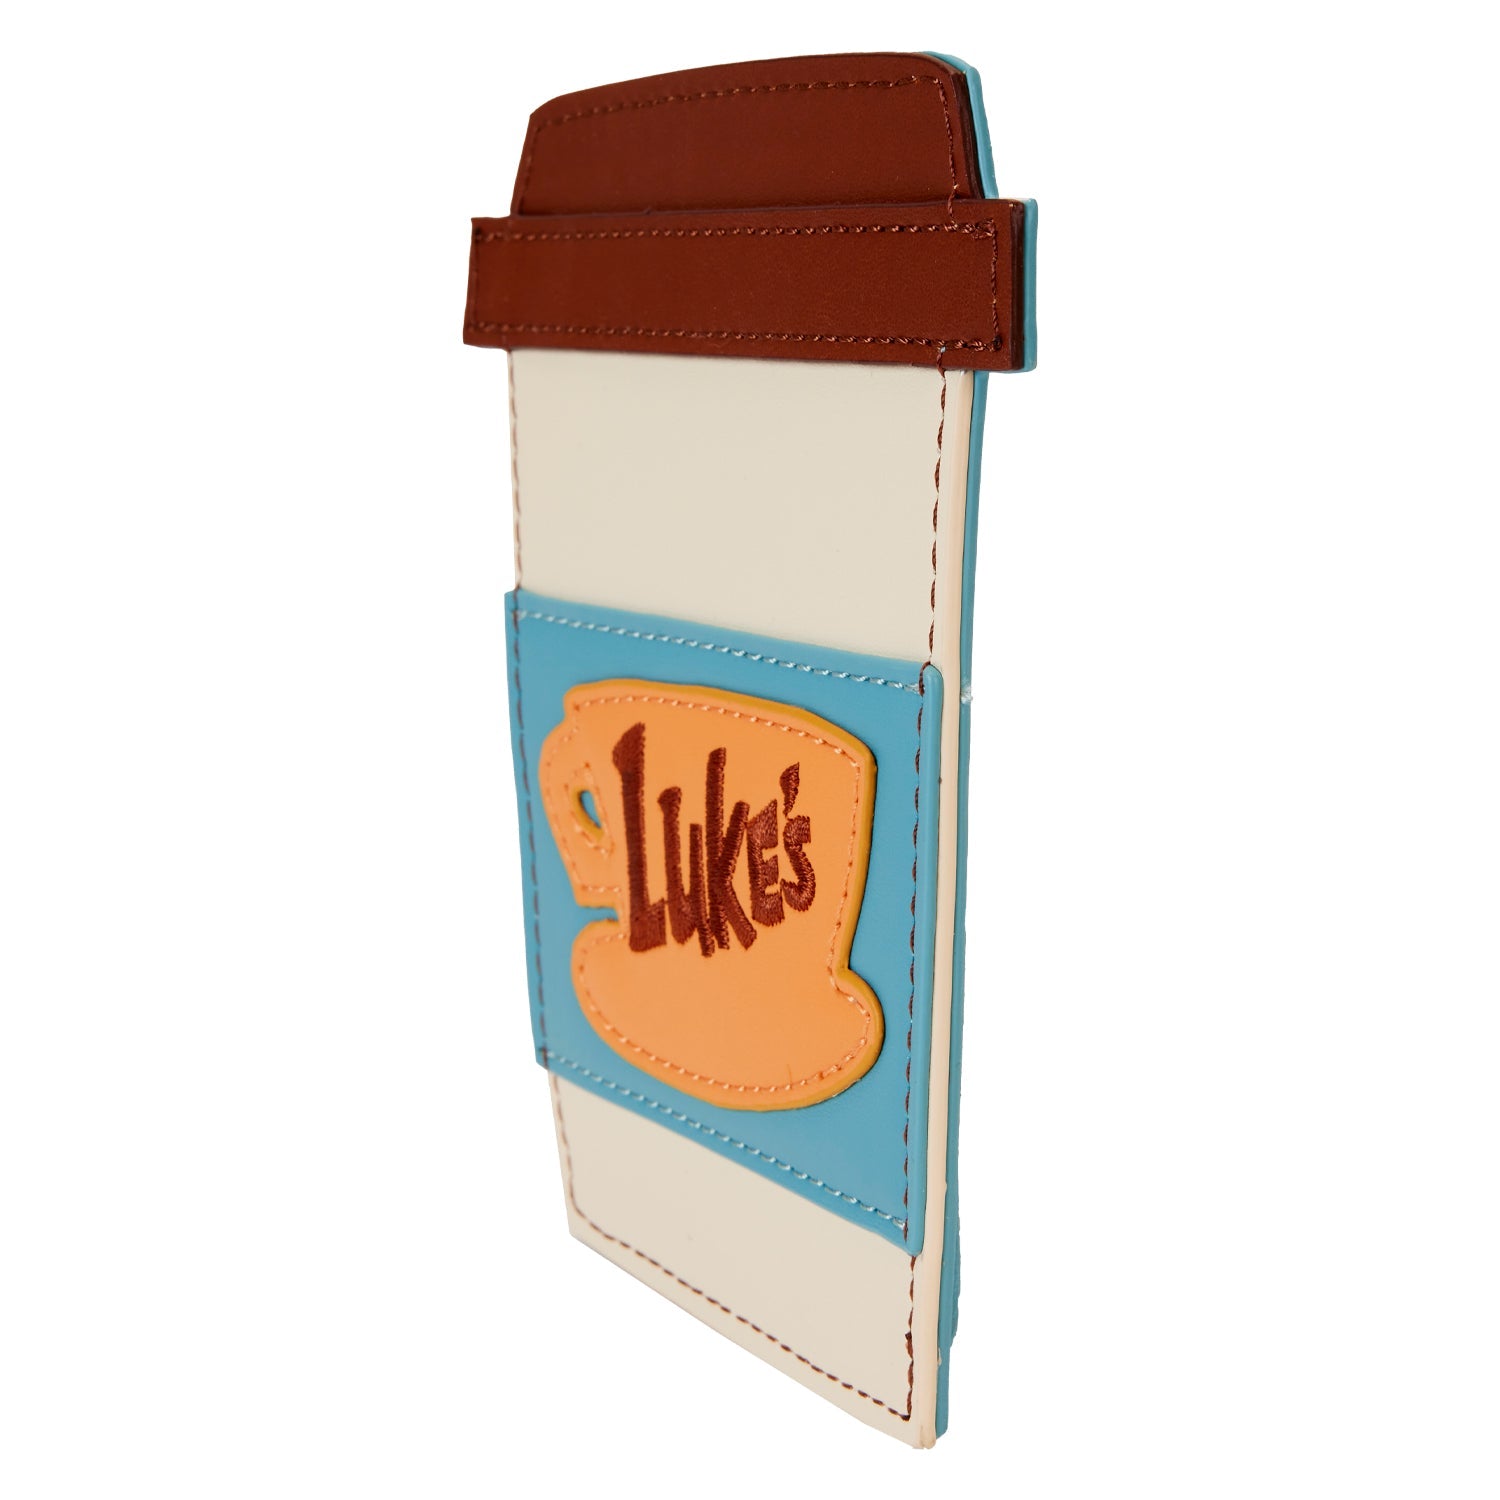 Loungefly x Gilmore Girls Luke's Diner Coffee Cup Card Holder - GeekCore